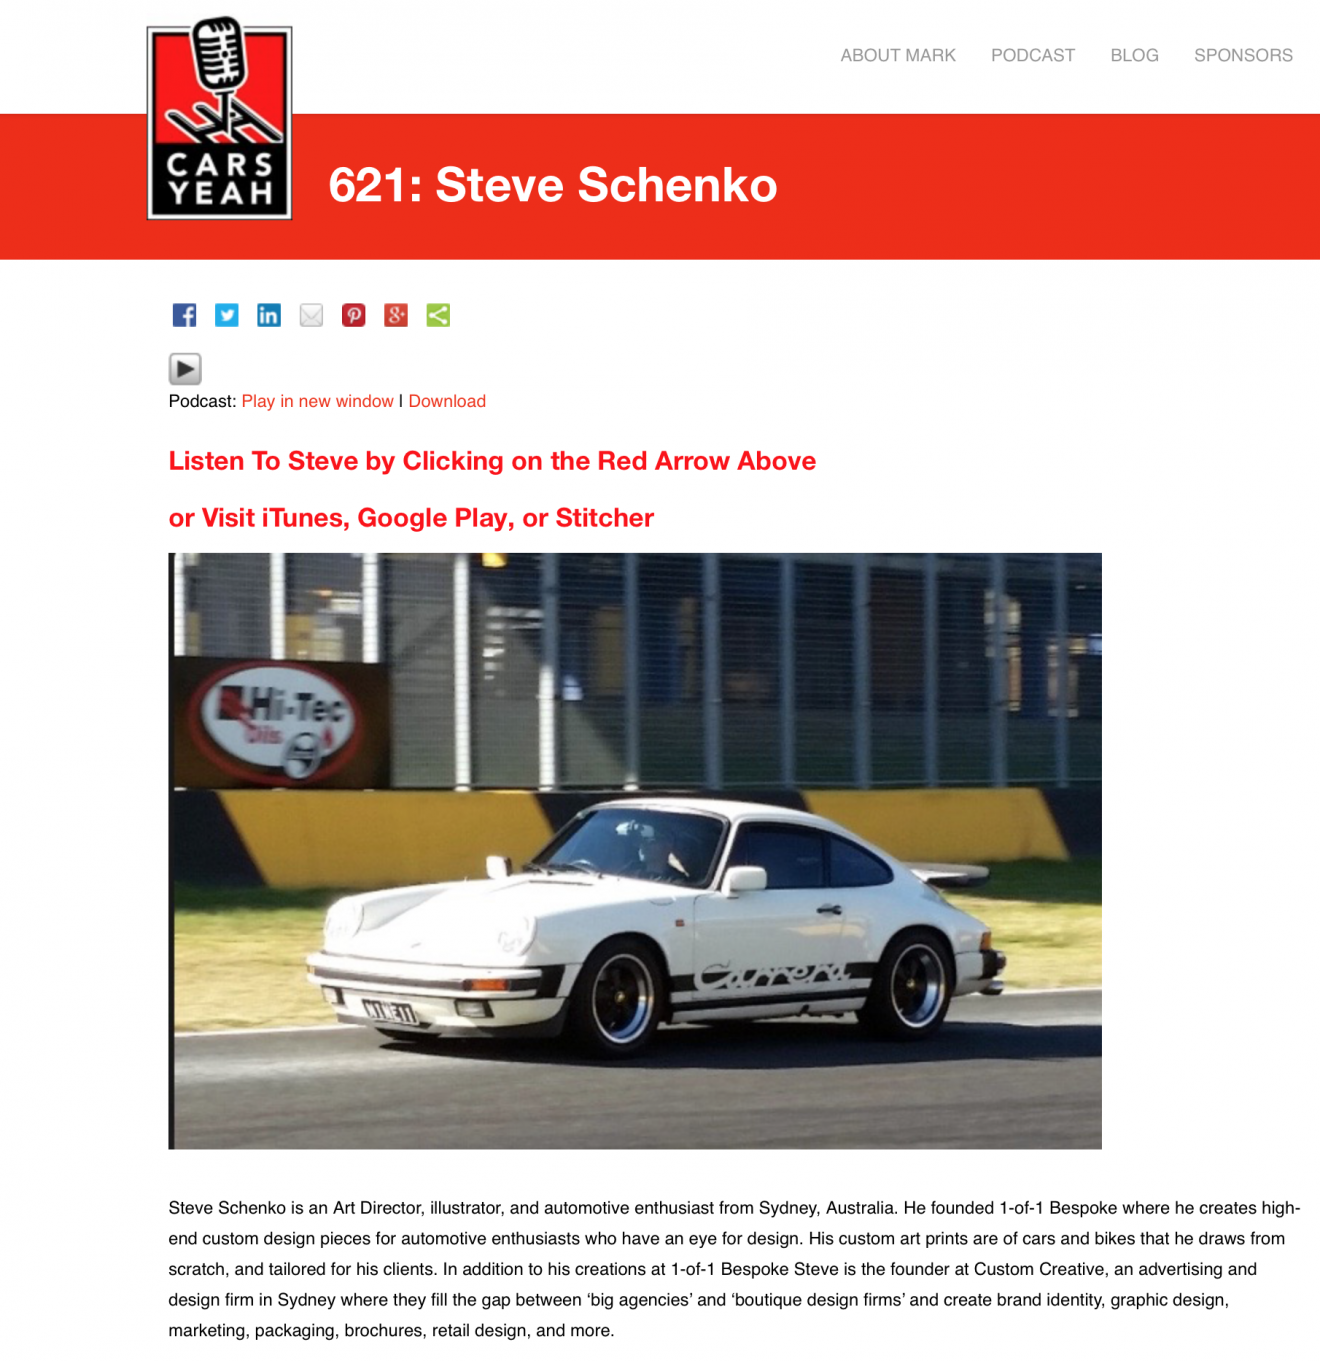 Cars Yeah PodCast featuring Steve Schenko of 1-of-1